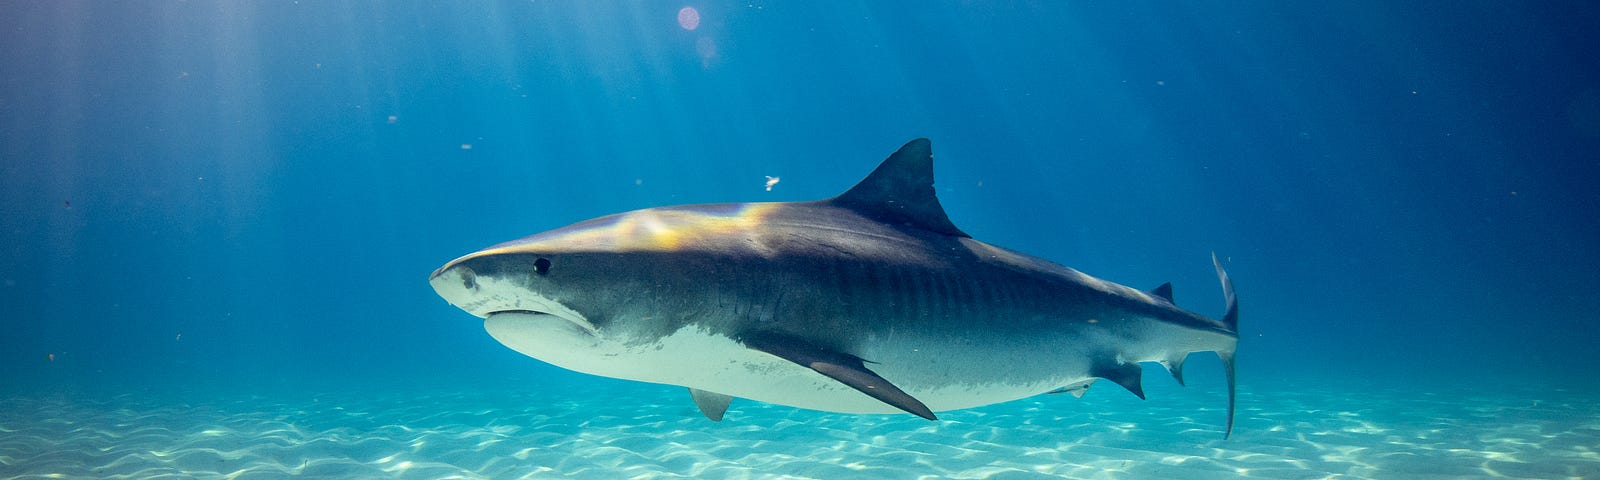 Things you may not know about sharks